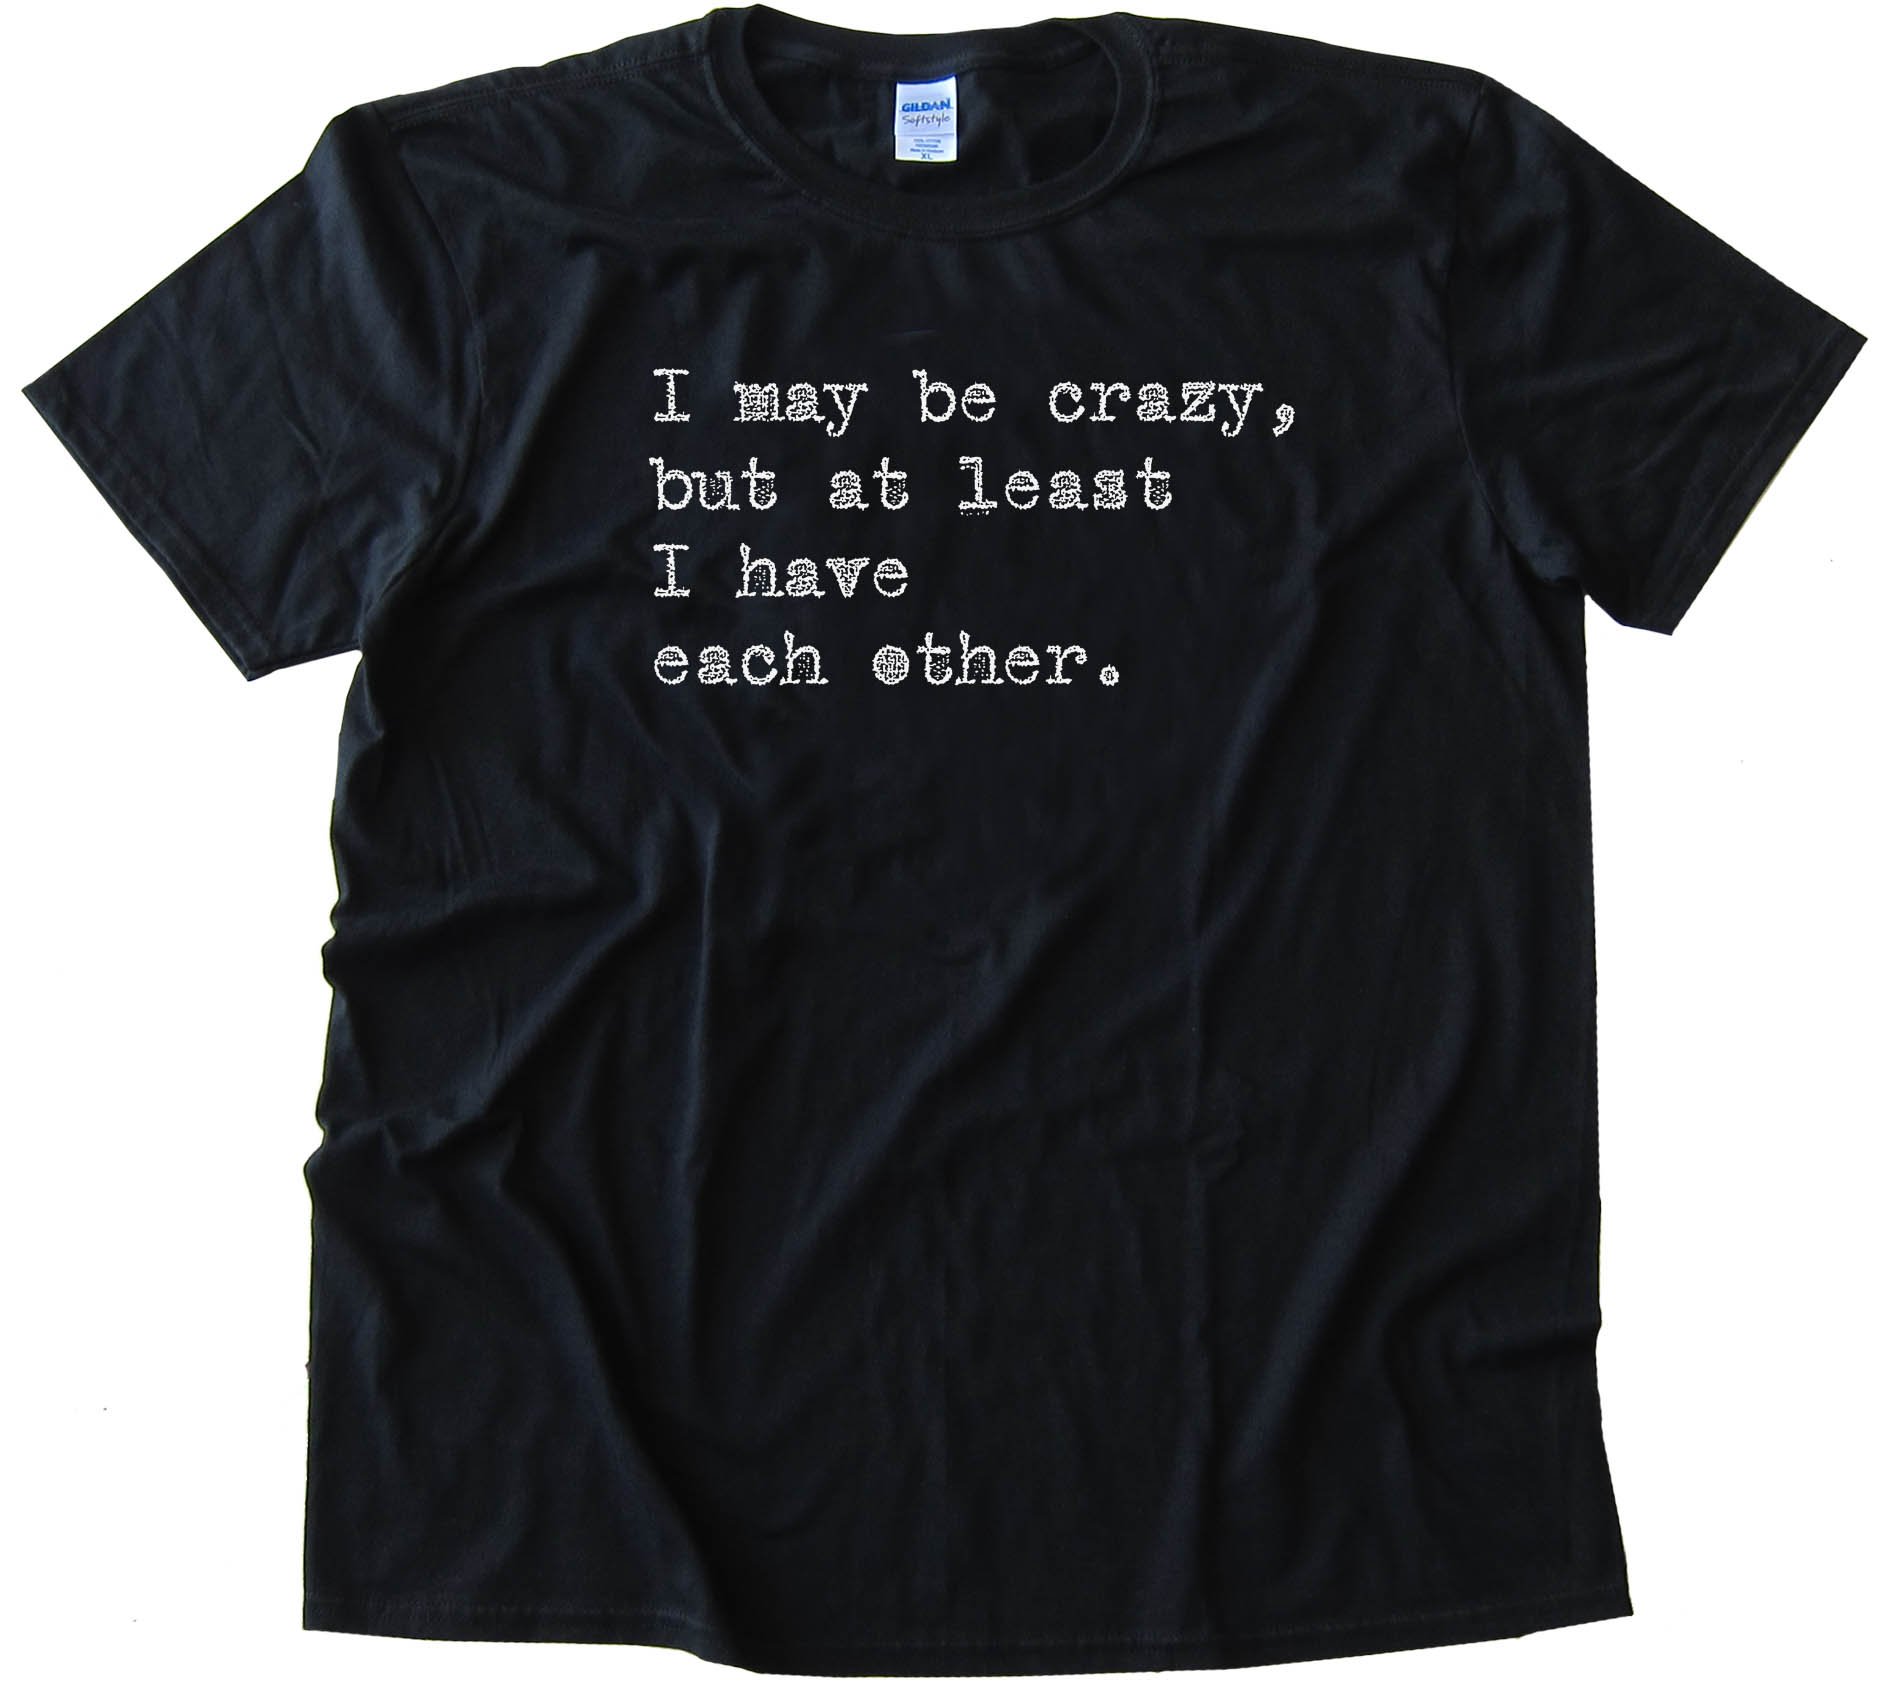 I May Be Crazy But At Least I Have Each Other - Tee Shirt